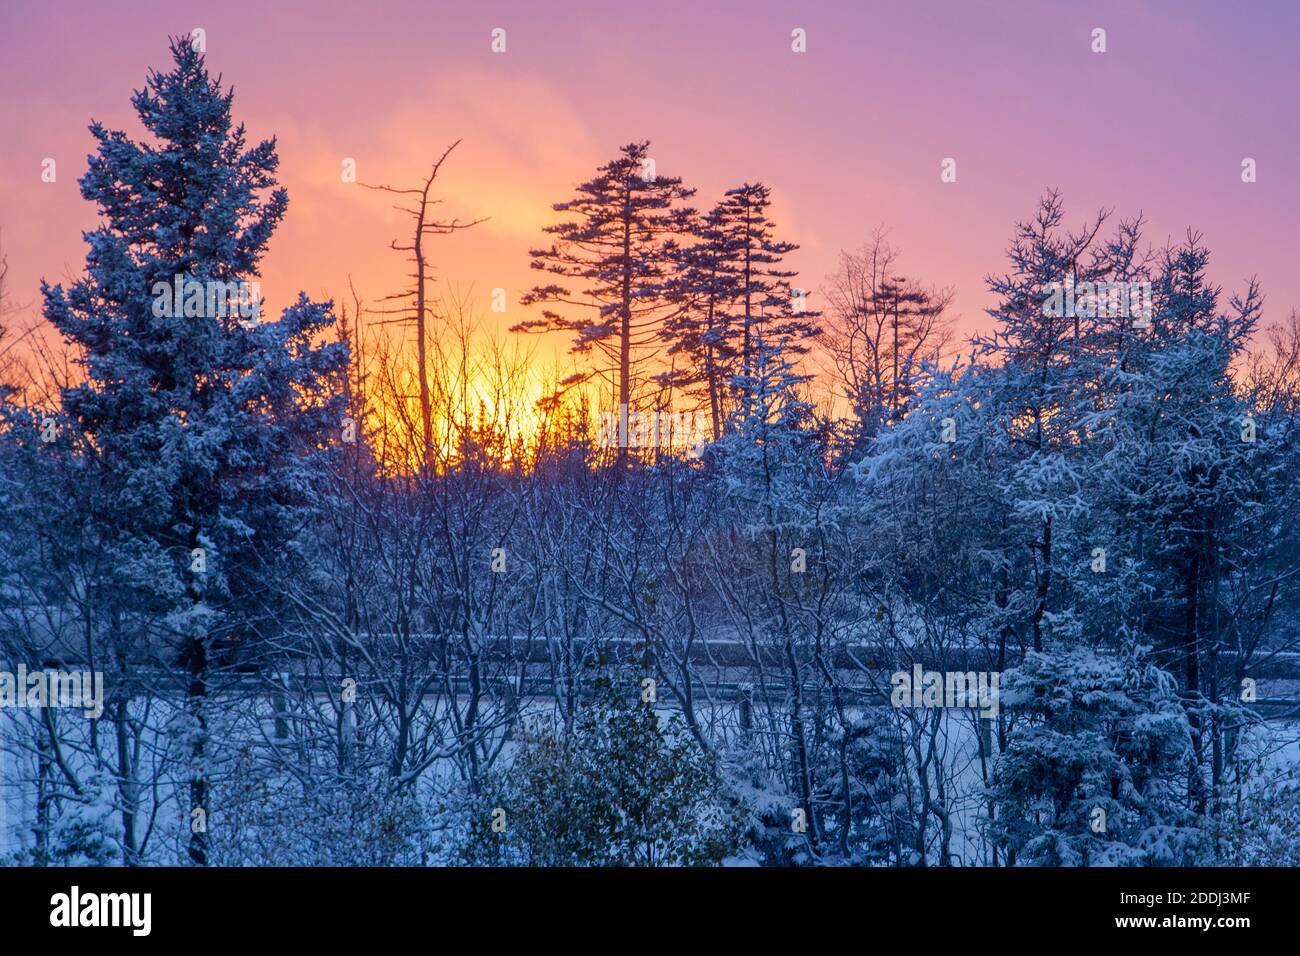 Sun setting over a highway with snow on the trees and a pink sky Stock Photo